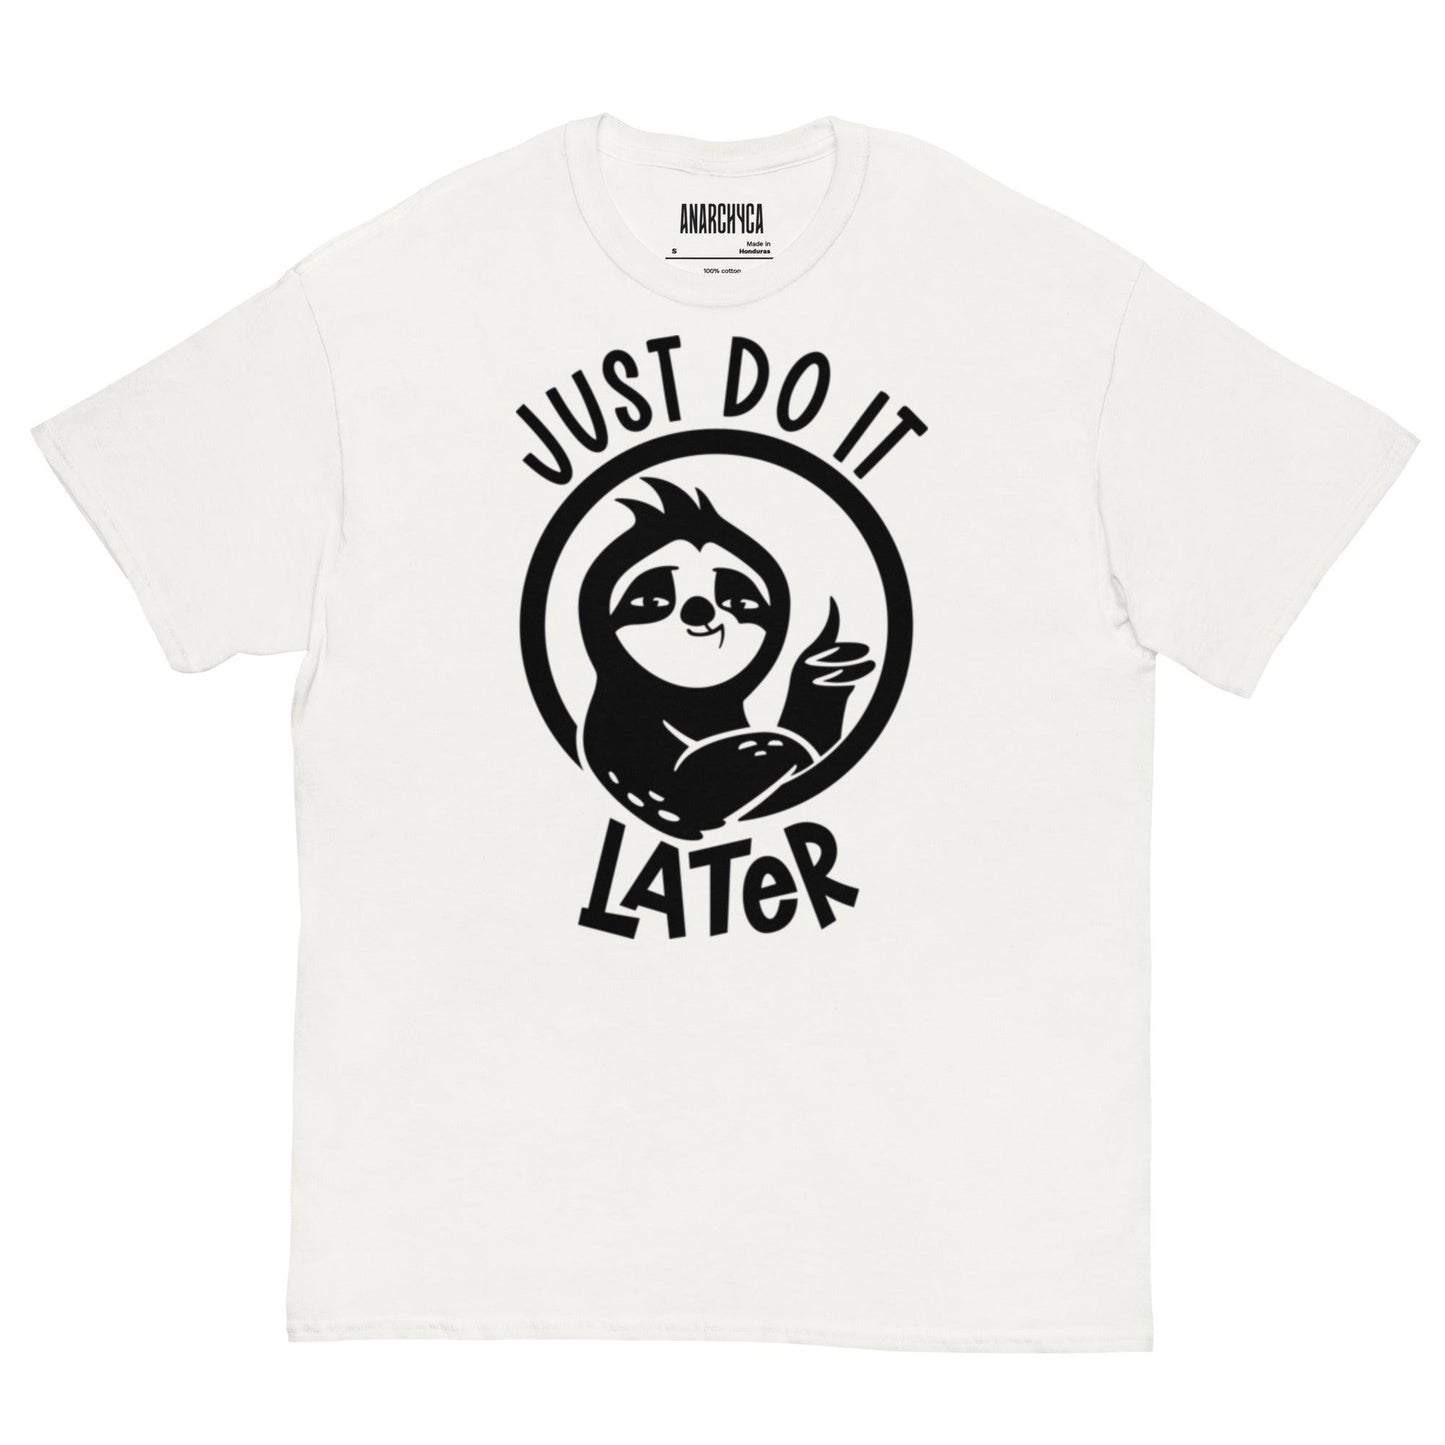 DO IT LATER - Anarchyca-clothing